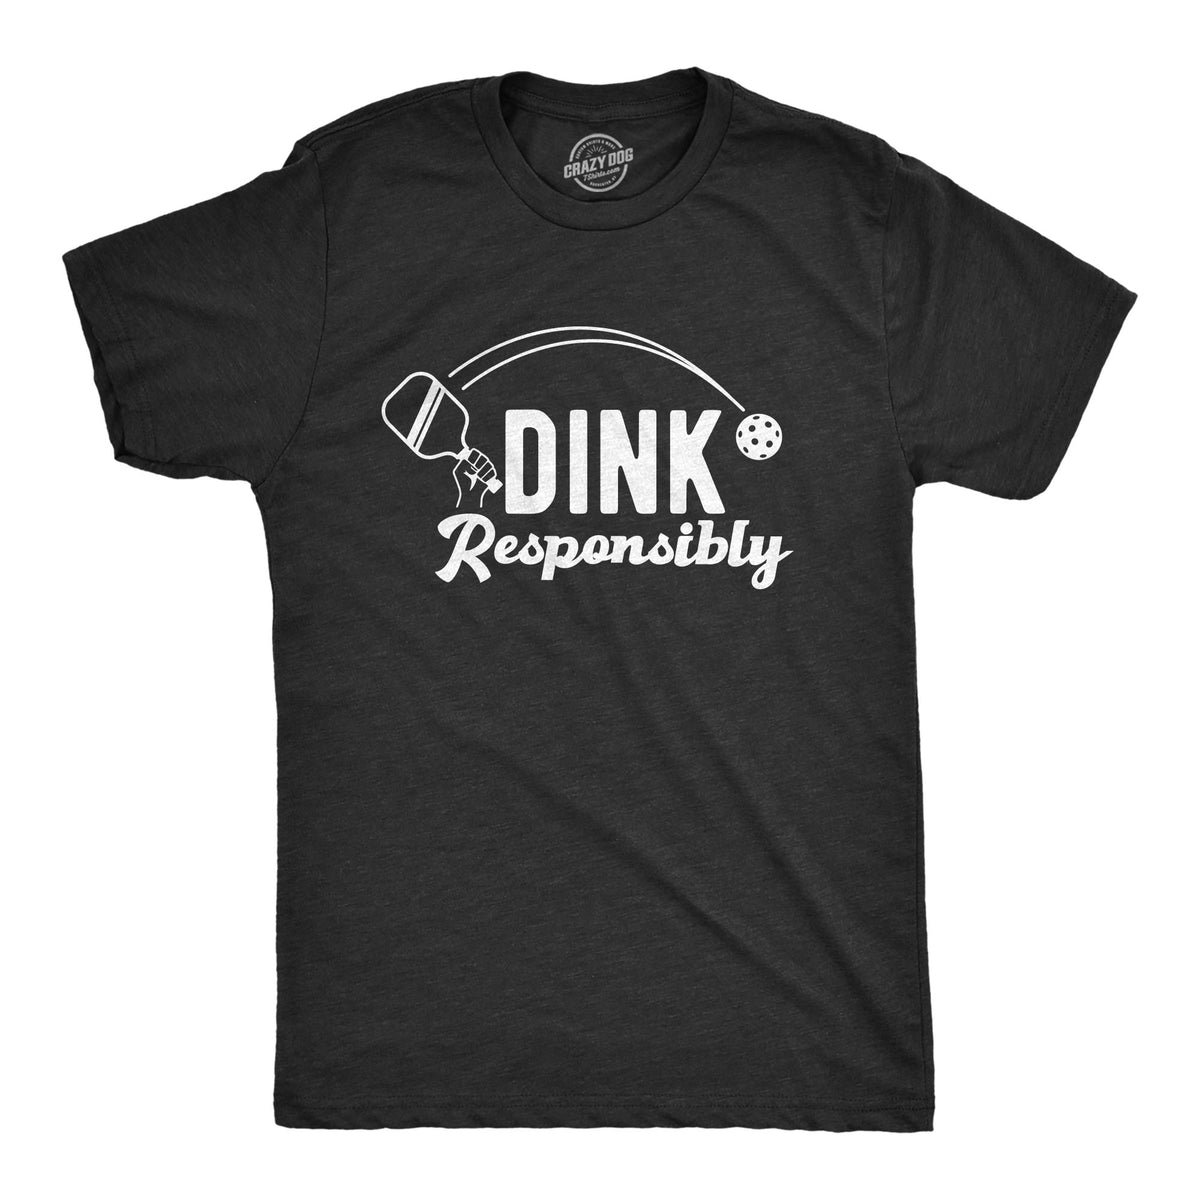 Funny Heather Black - Dink Responsibly Dink Responsibly Mens T Shirt Nerdy fitness Sarcastic Tee